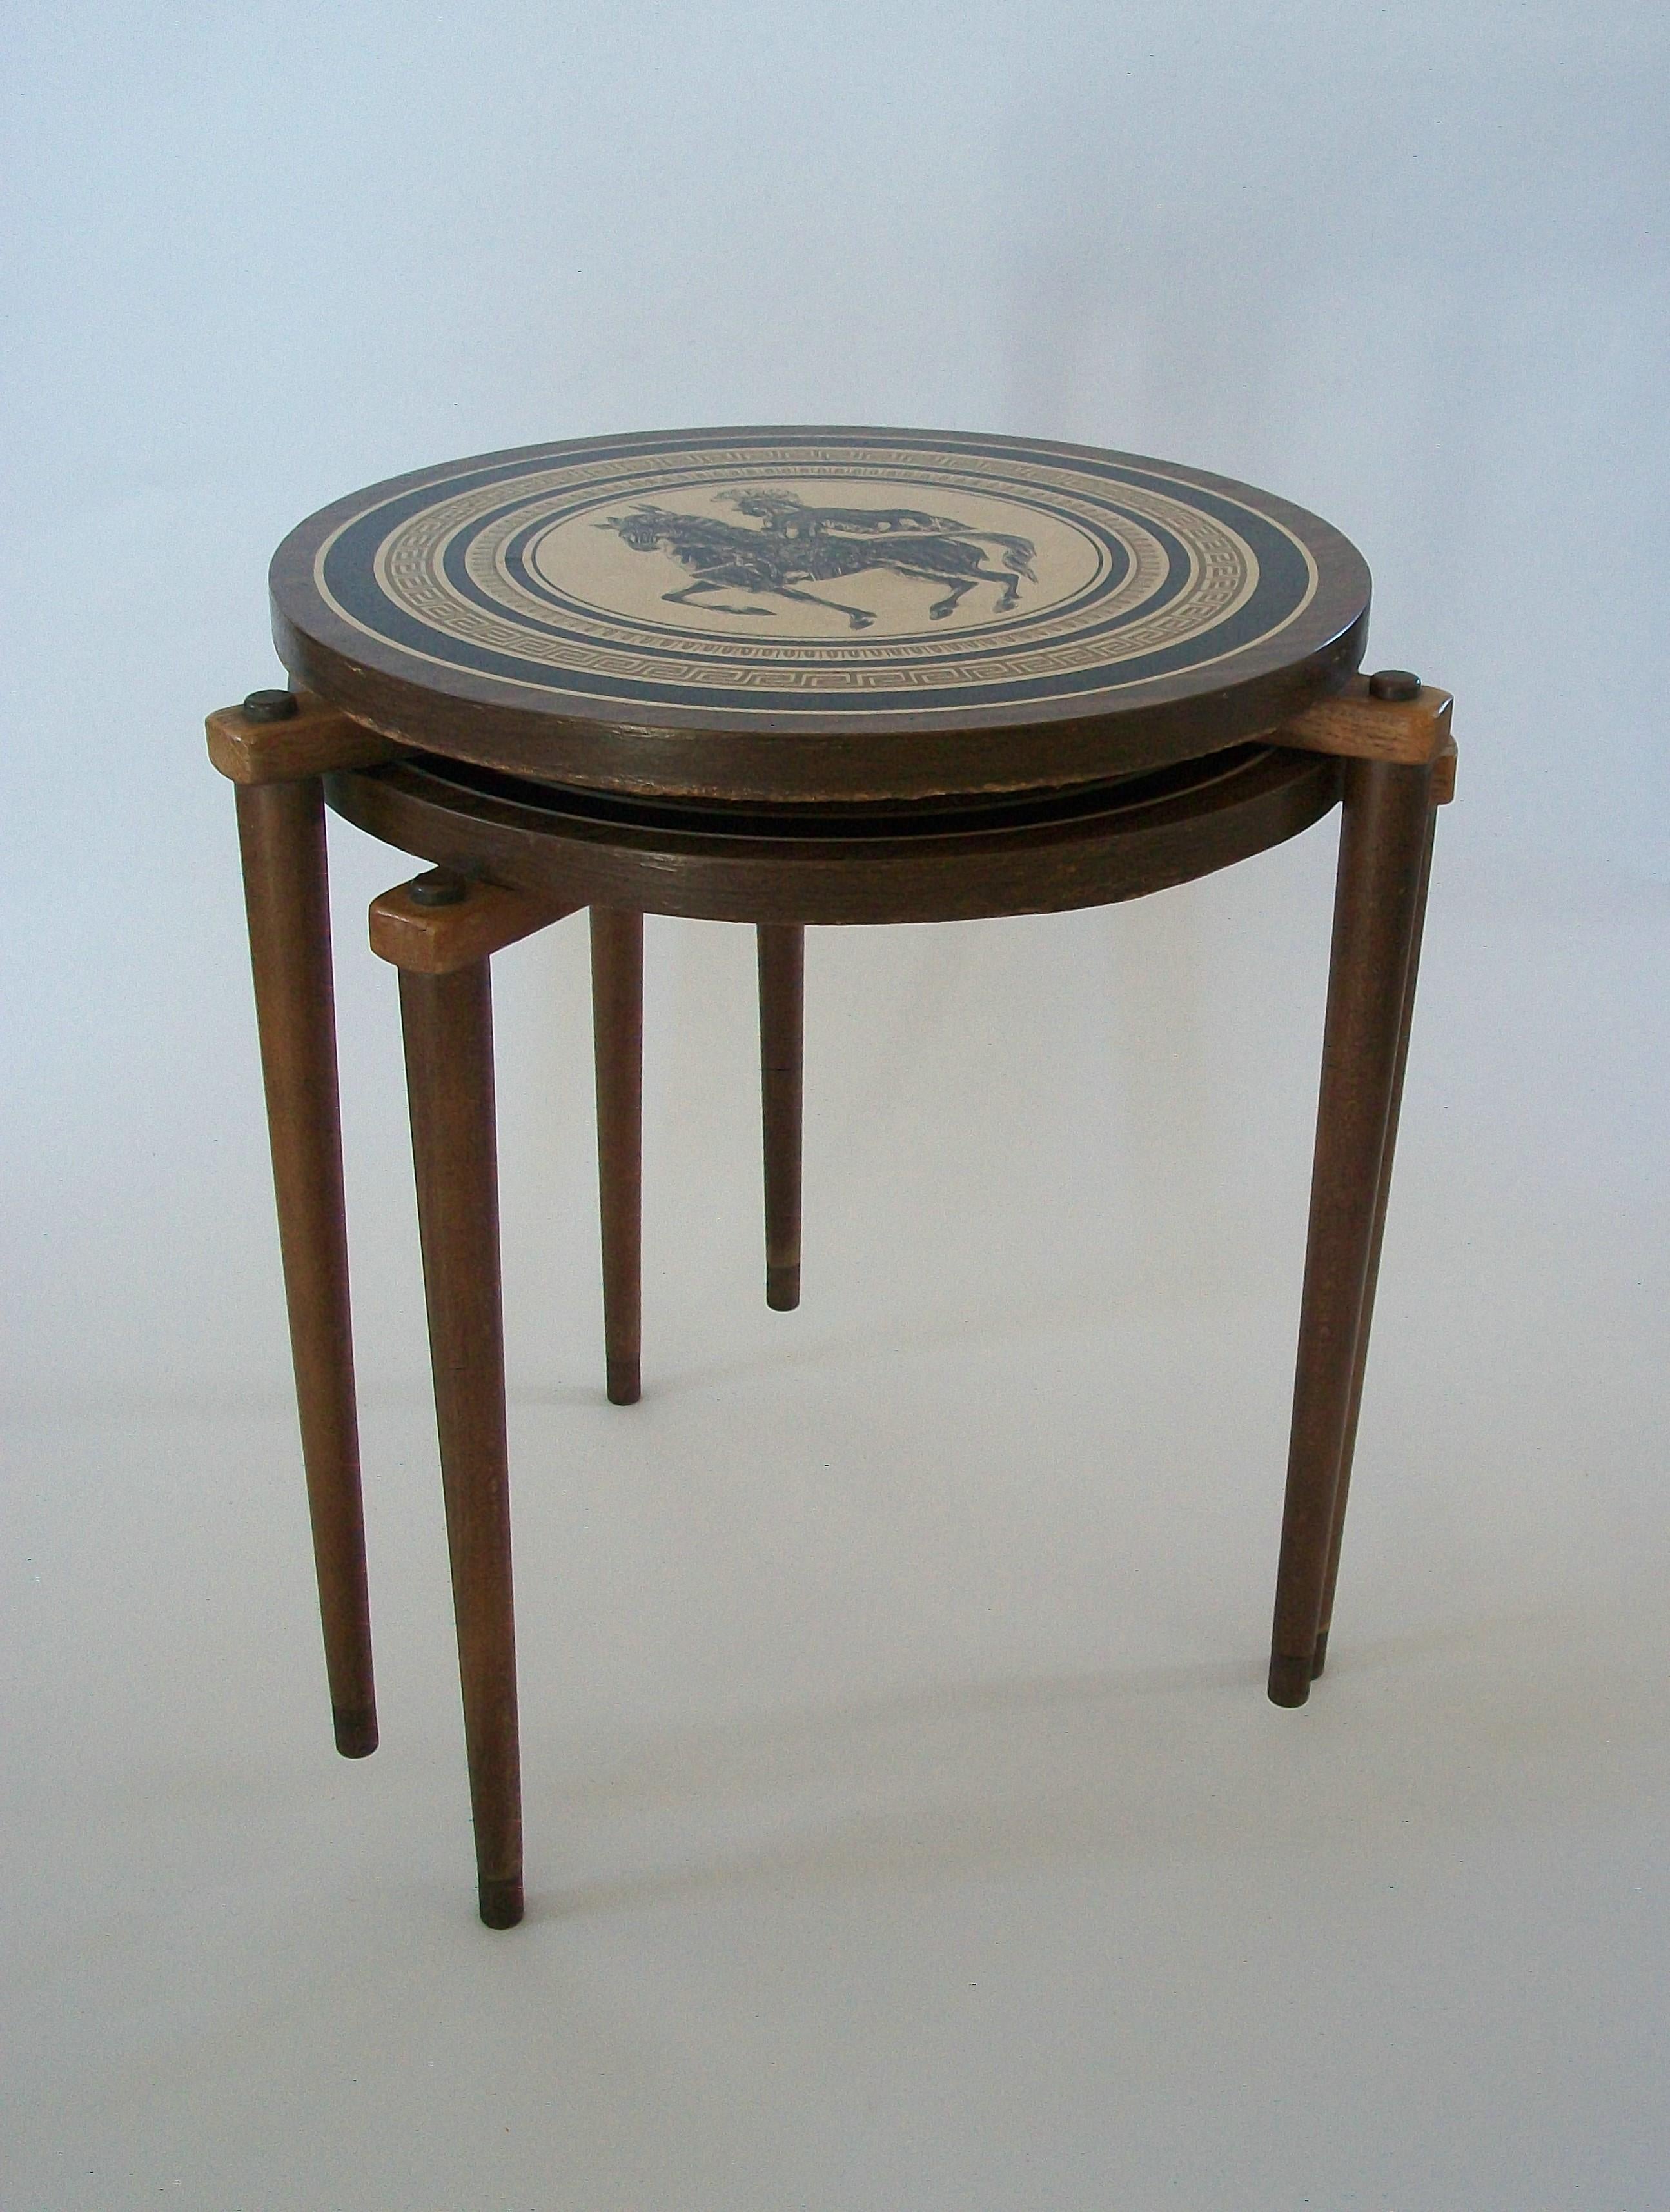 20th Century Vintage Pair of Fornasetti Style Stacking Occasional Tables - U.S. - Mid 20th C.